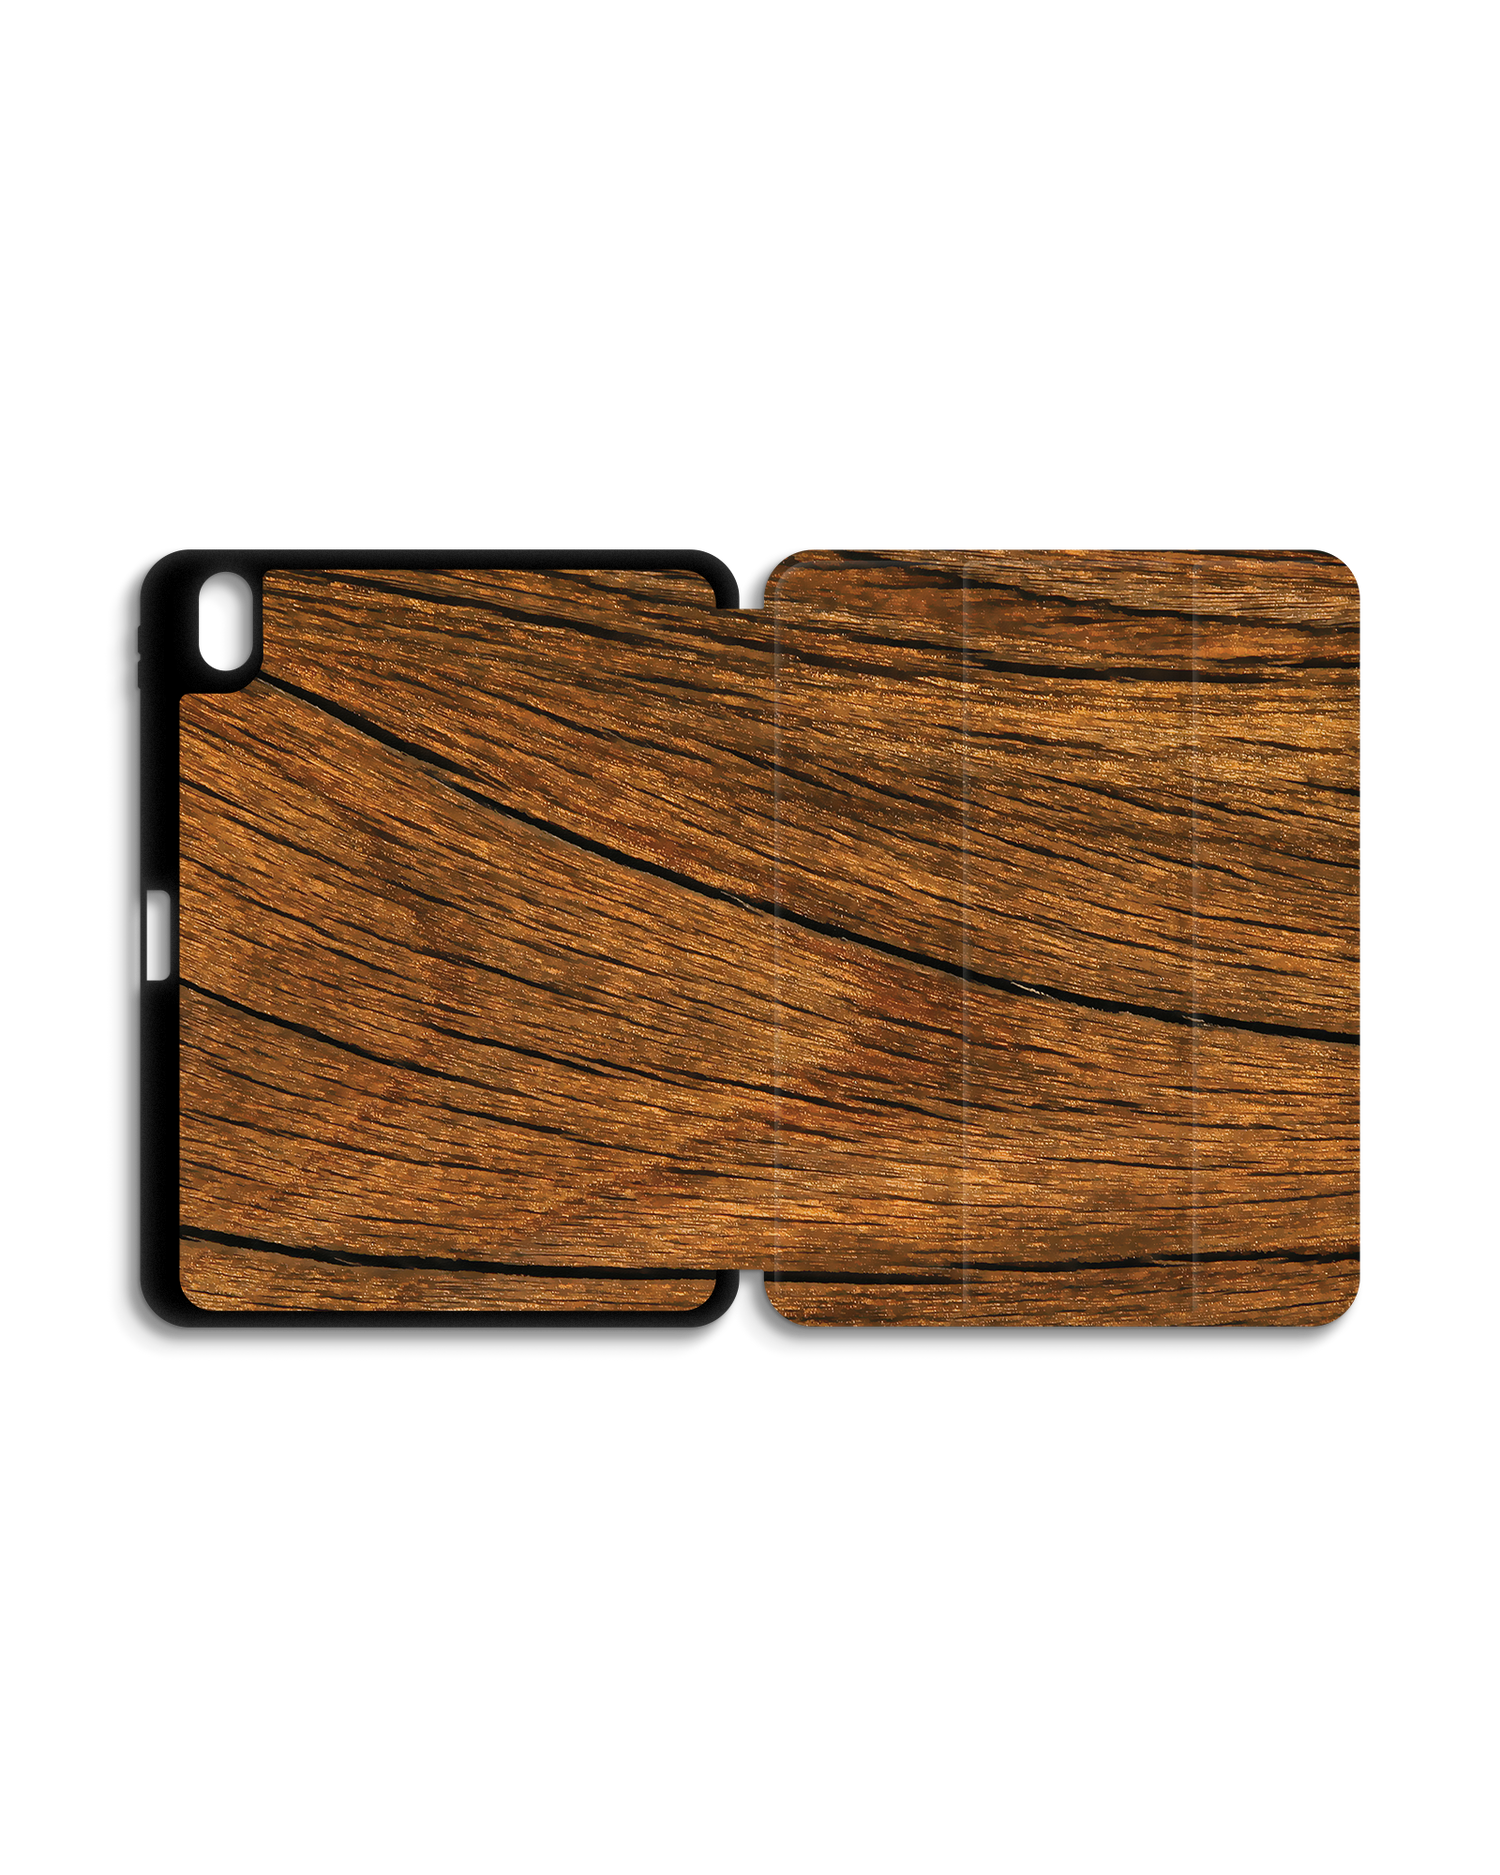 Wood iPad Case with Pencil Holder for Apple iPad (10th Generation): Opened exterior view